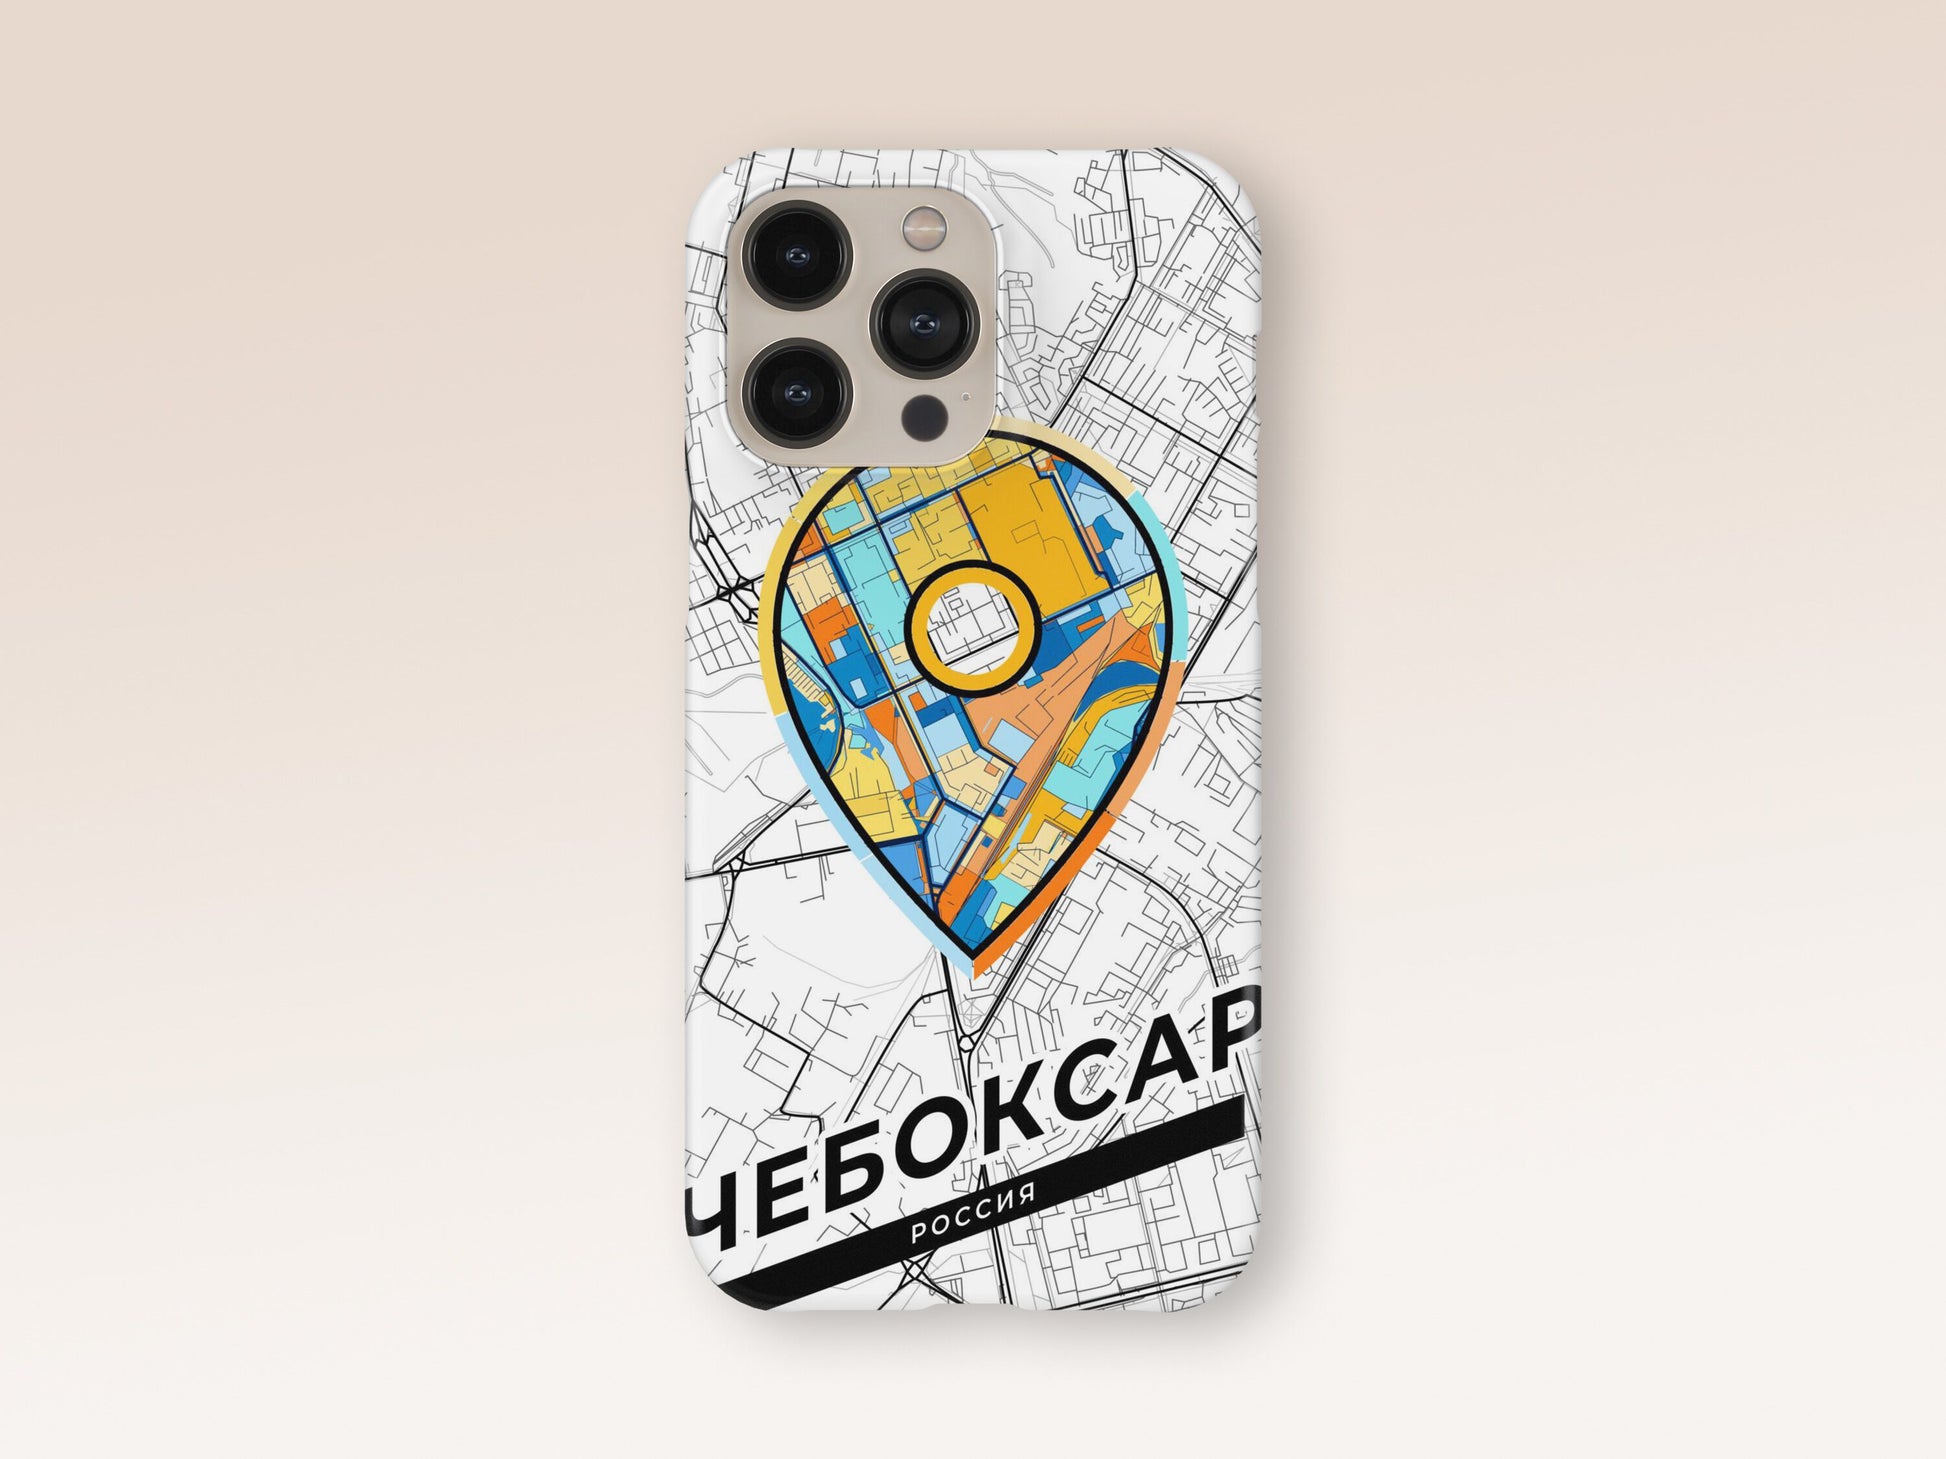 Cheboksary Russia slim phone case with colorful icon. Birthday, wedding or housewarming gift. Couple match cases. 1